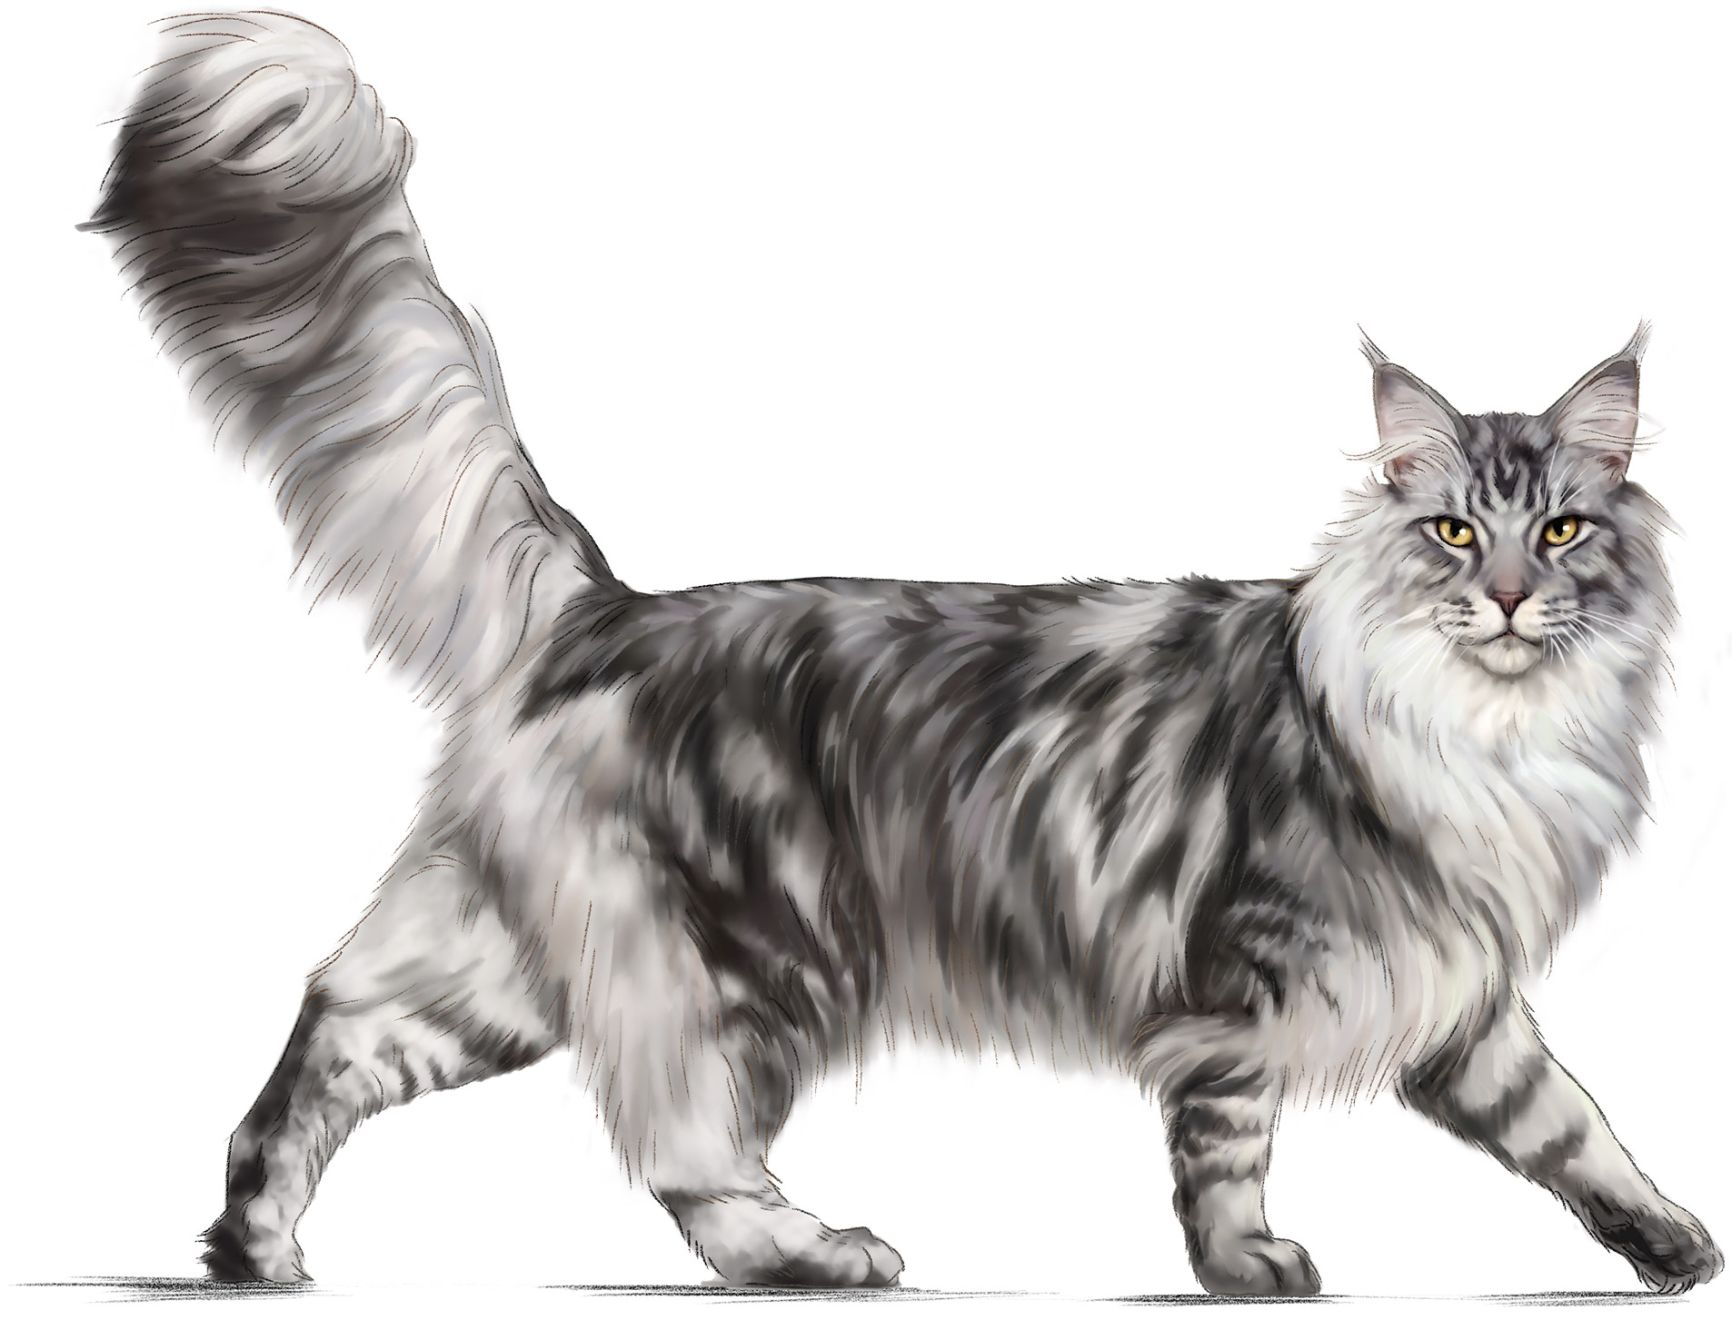 Illustration of a standing Maine Coon